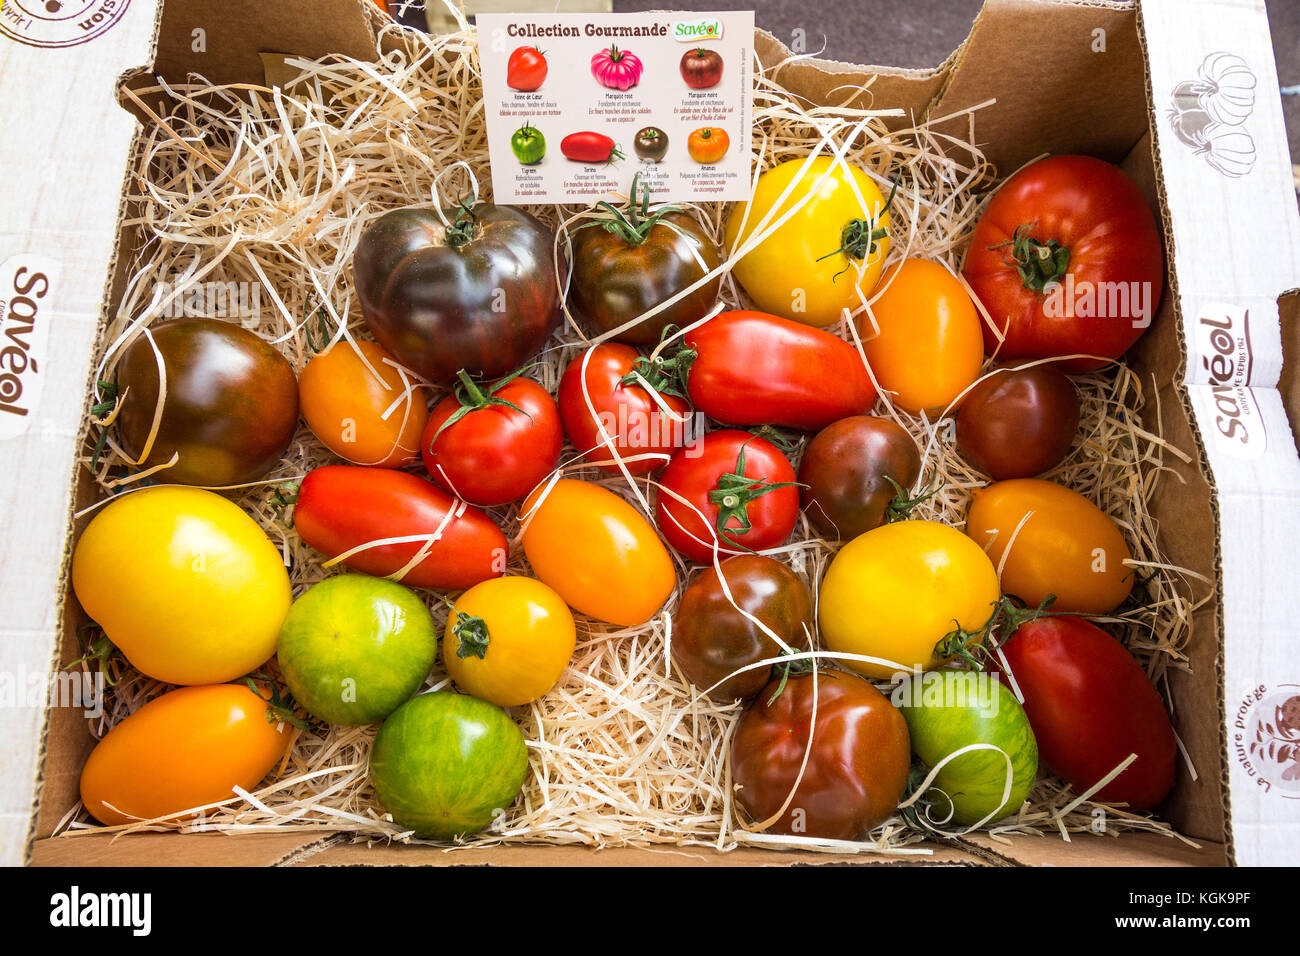 Coloured varieties of heritage tomatoes on French market stall. Stock Photo